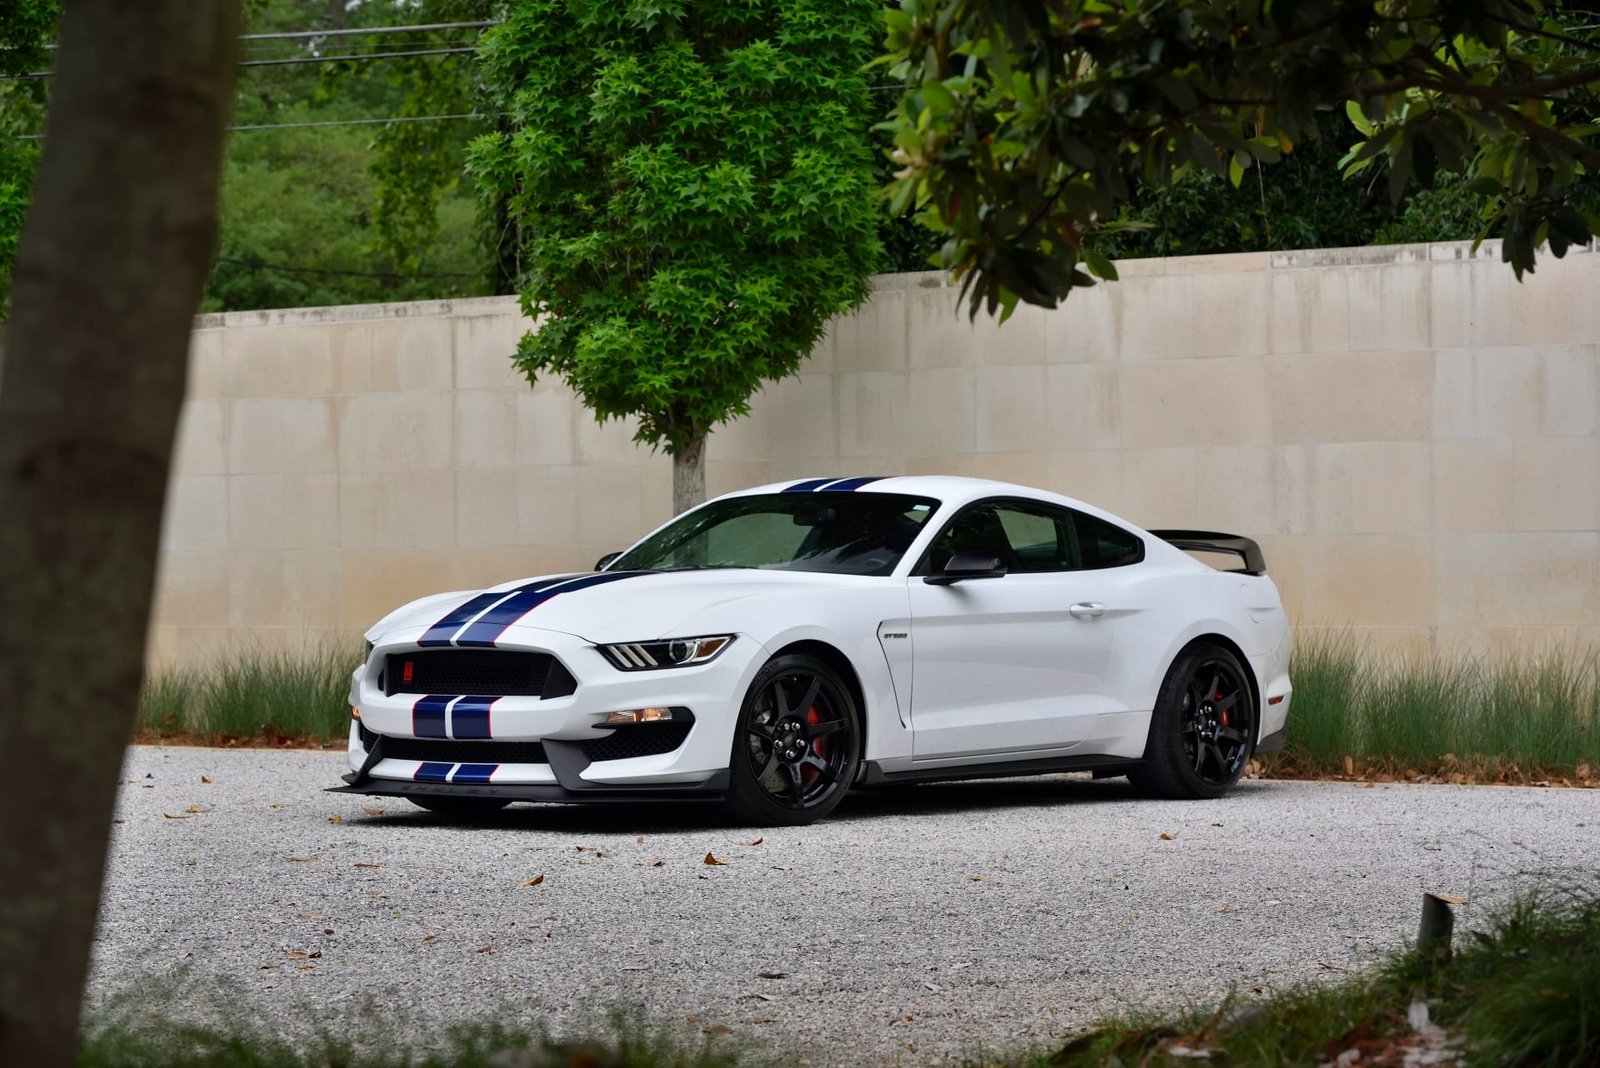 2015 Ford Shelby GT350R For Sale